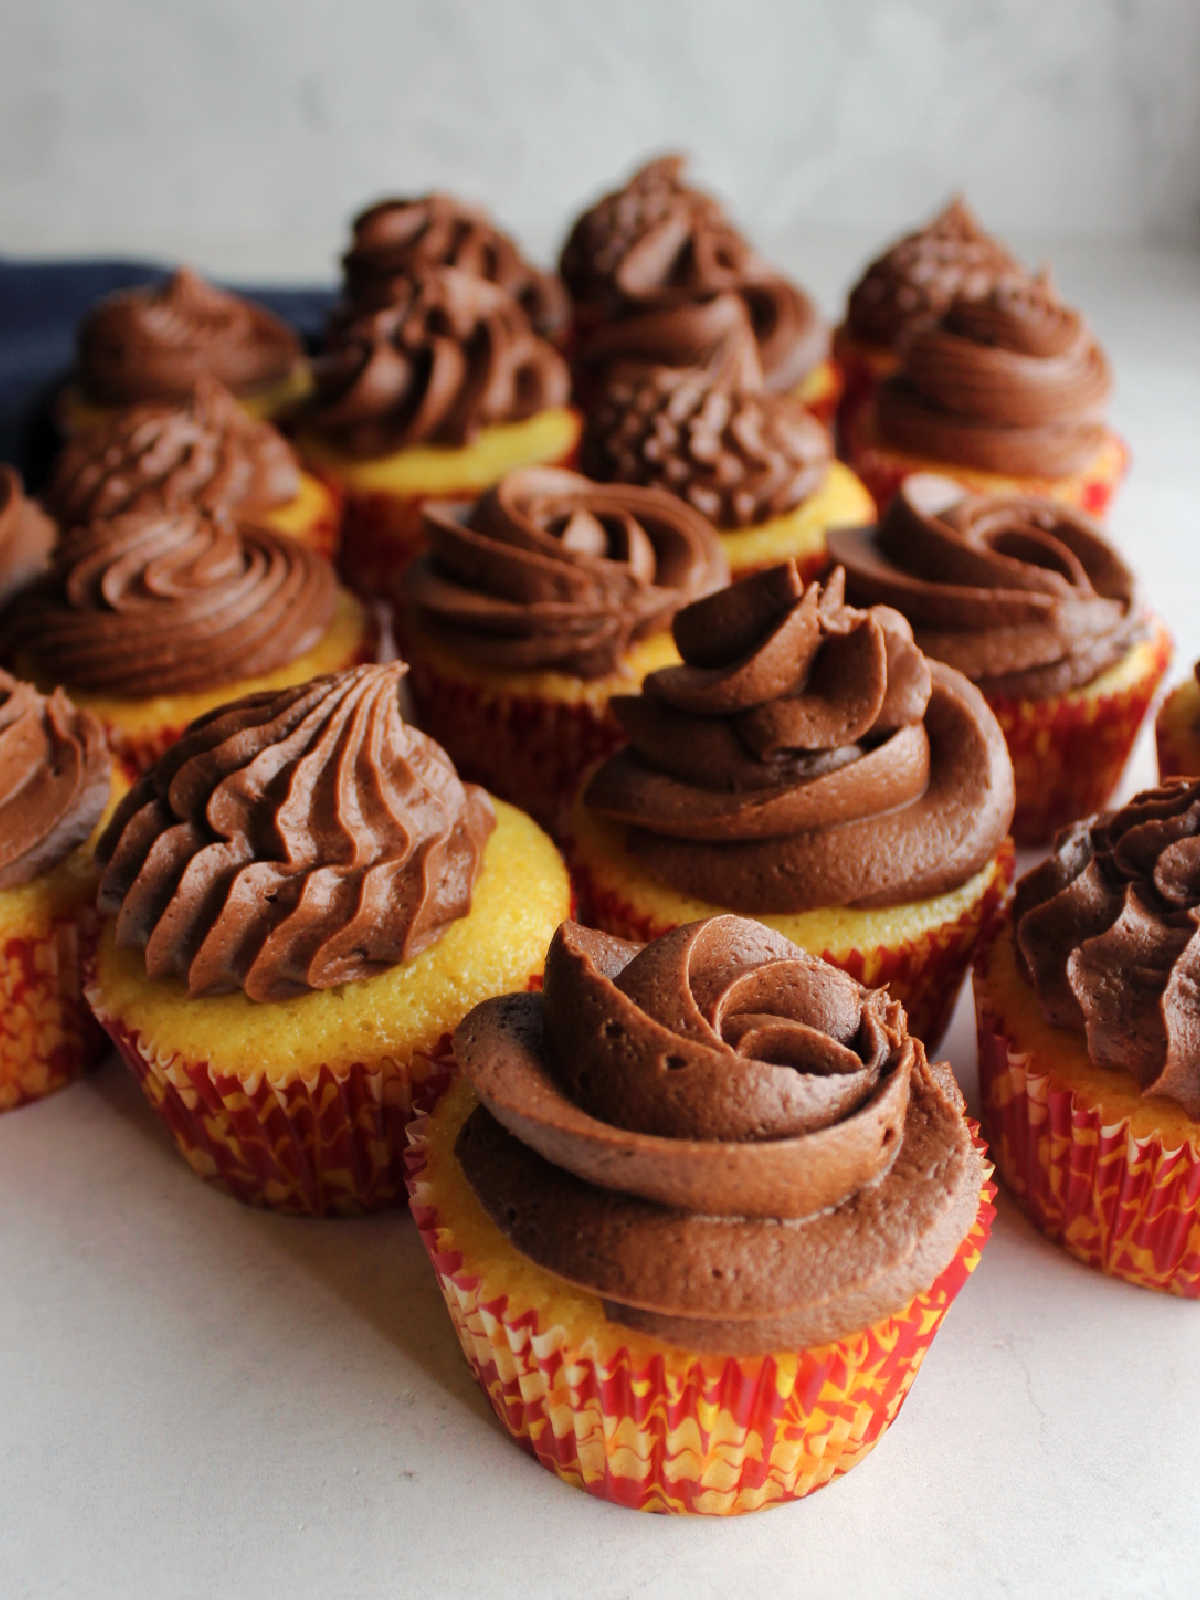 Buttery cupcakes topped with chocolate fudge frosting for piping.